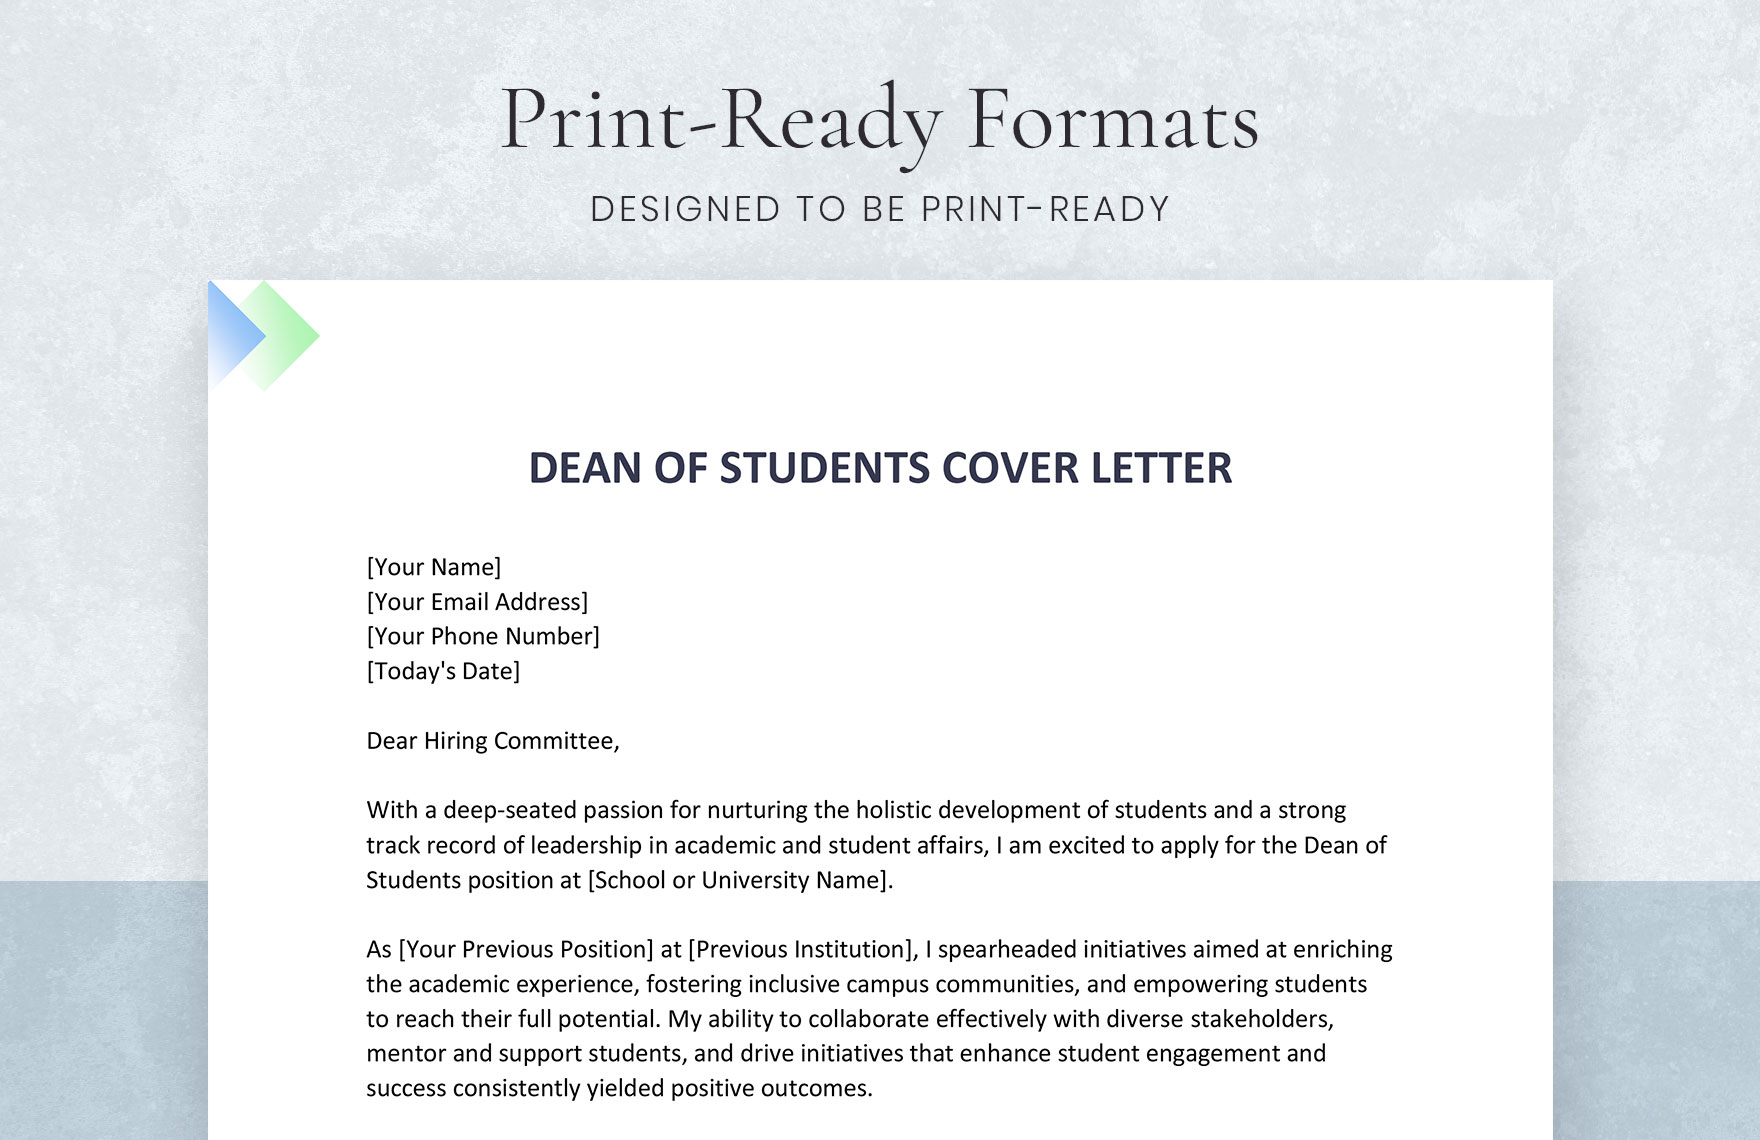 Dean of Students Cover Letter